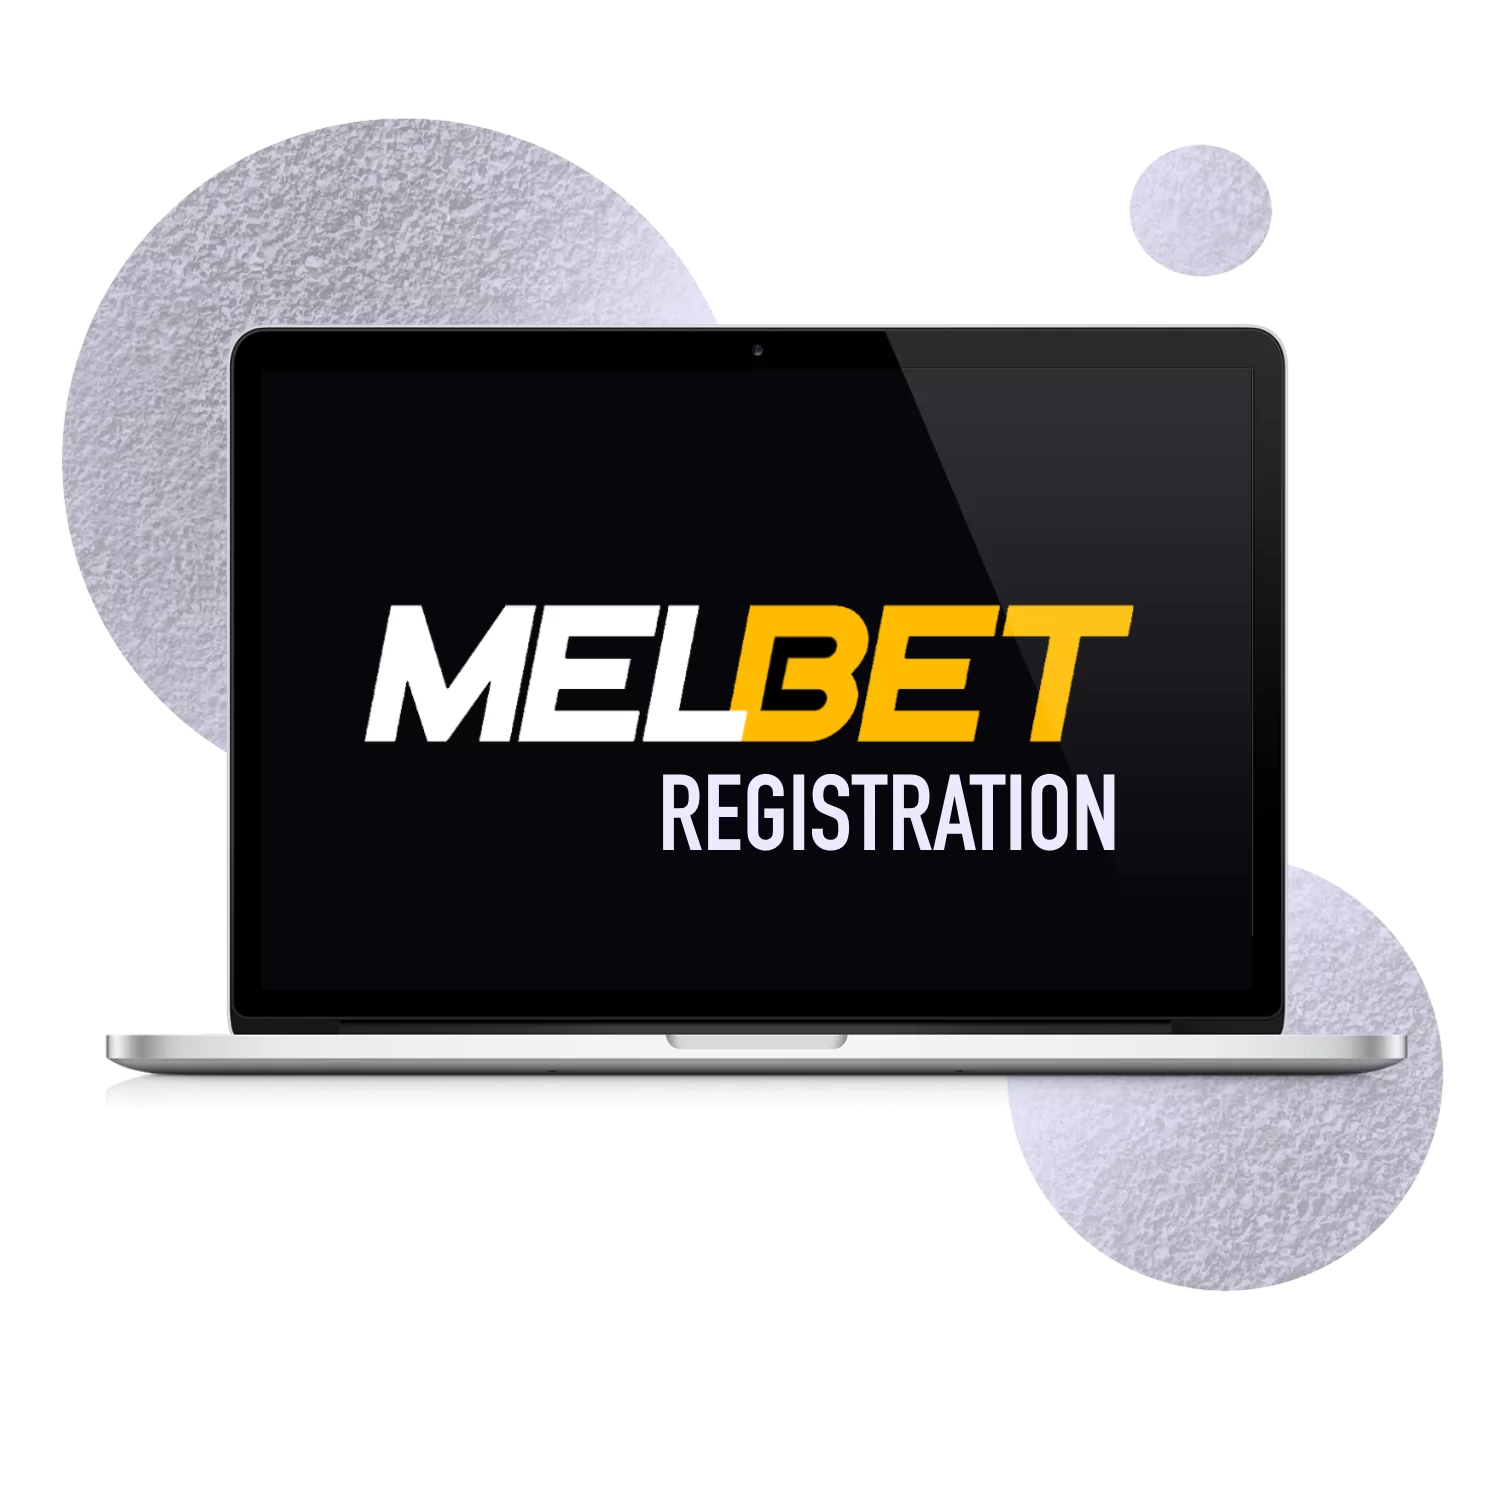 Sign up for Melbet and place bets on cricket easily.